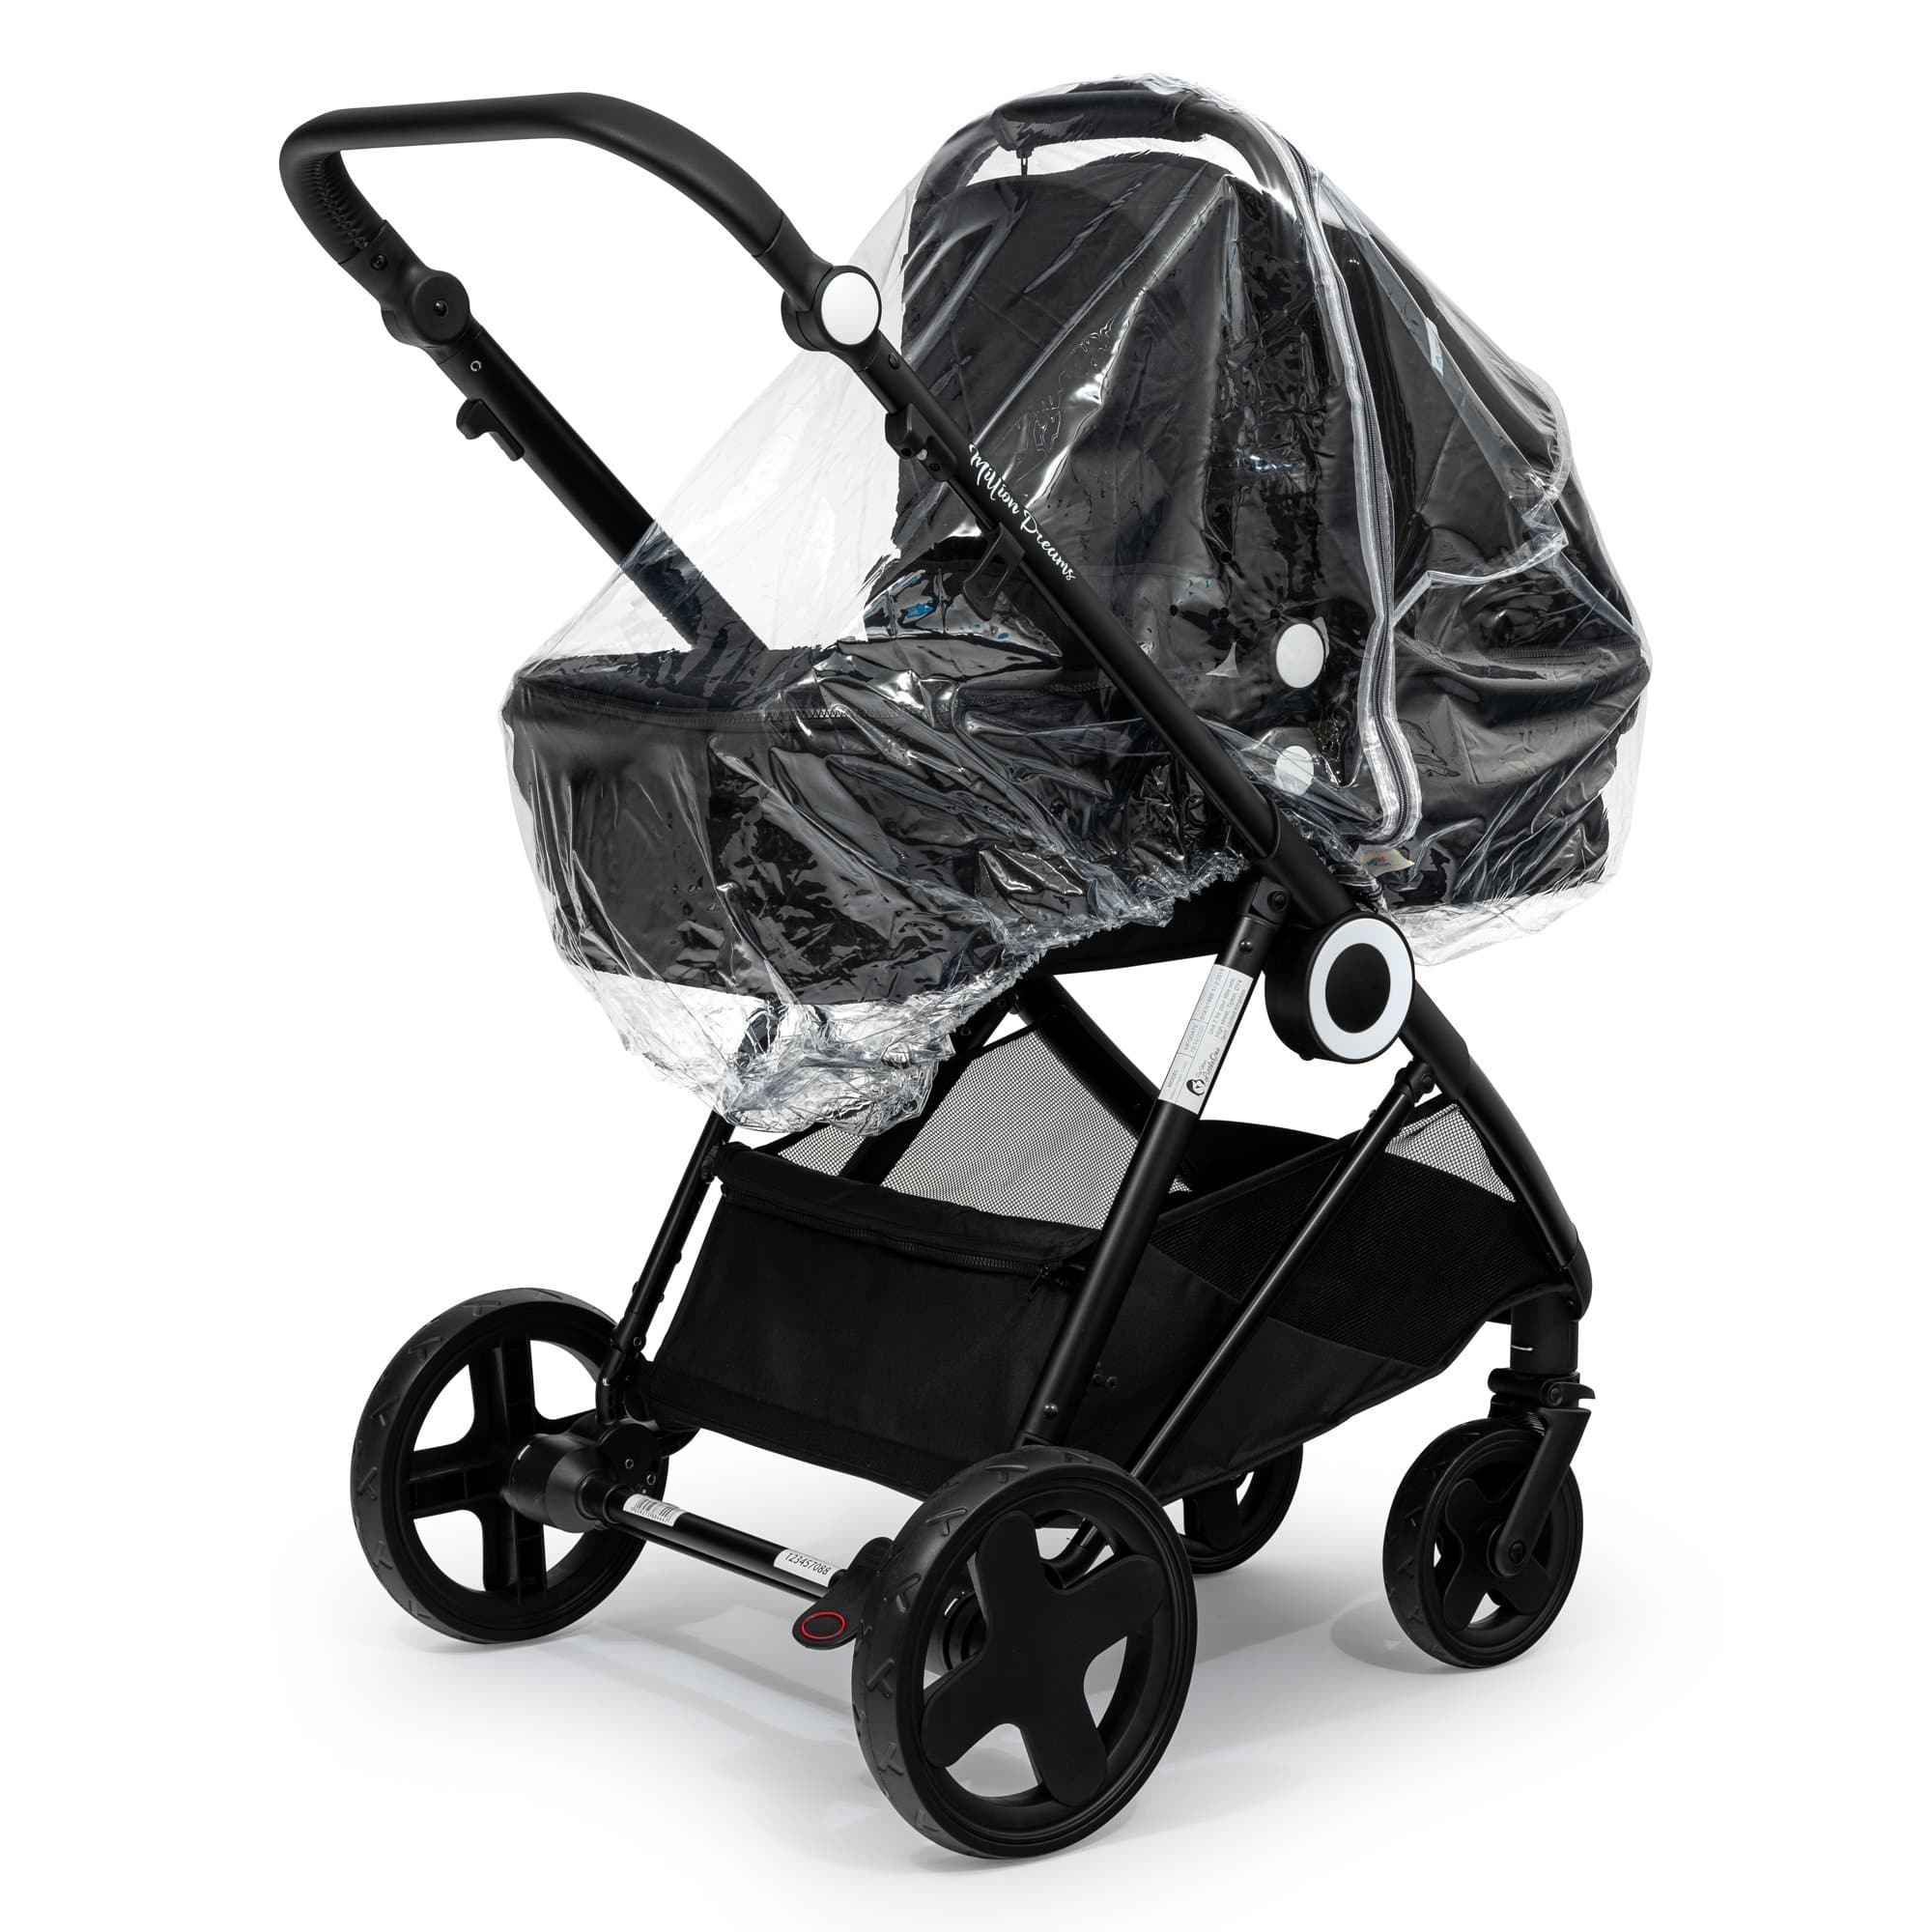 2 in 1 Rain Cover Compatible with Orbit - Fits All Models - For Your Little One